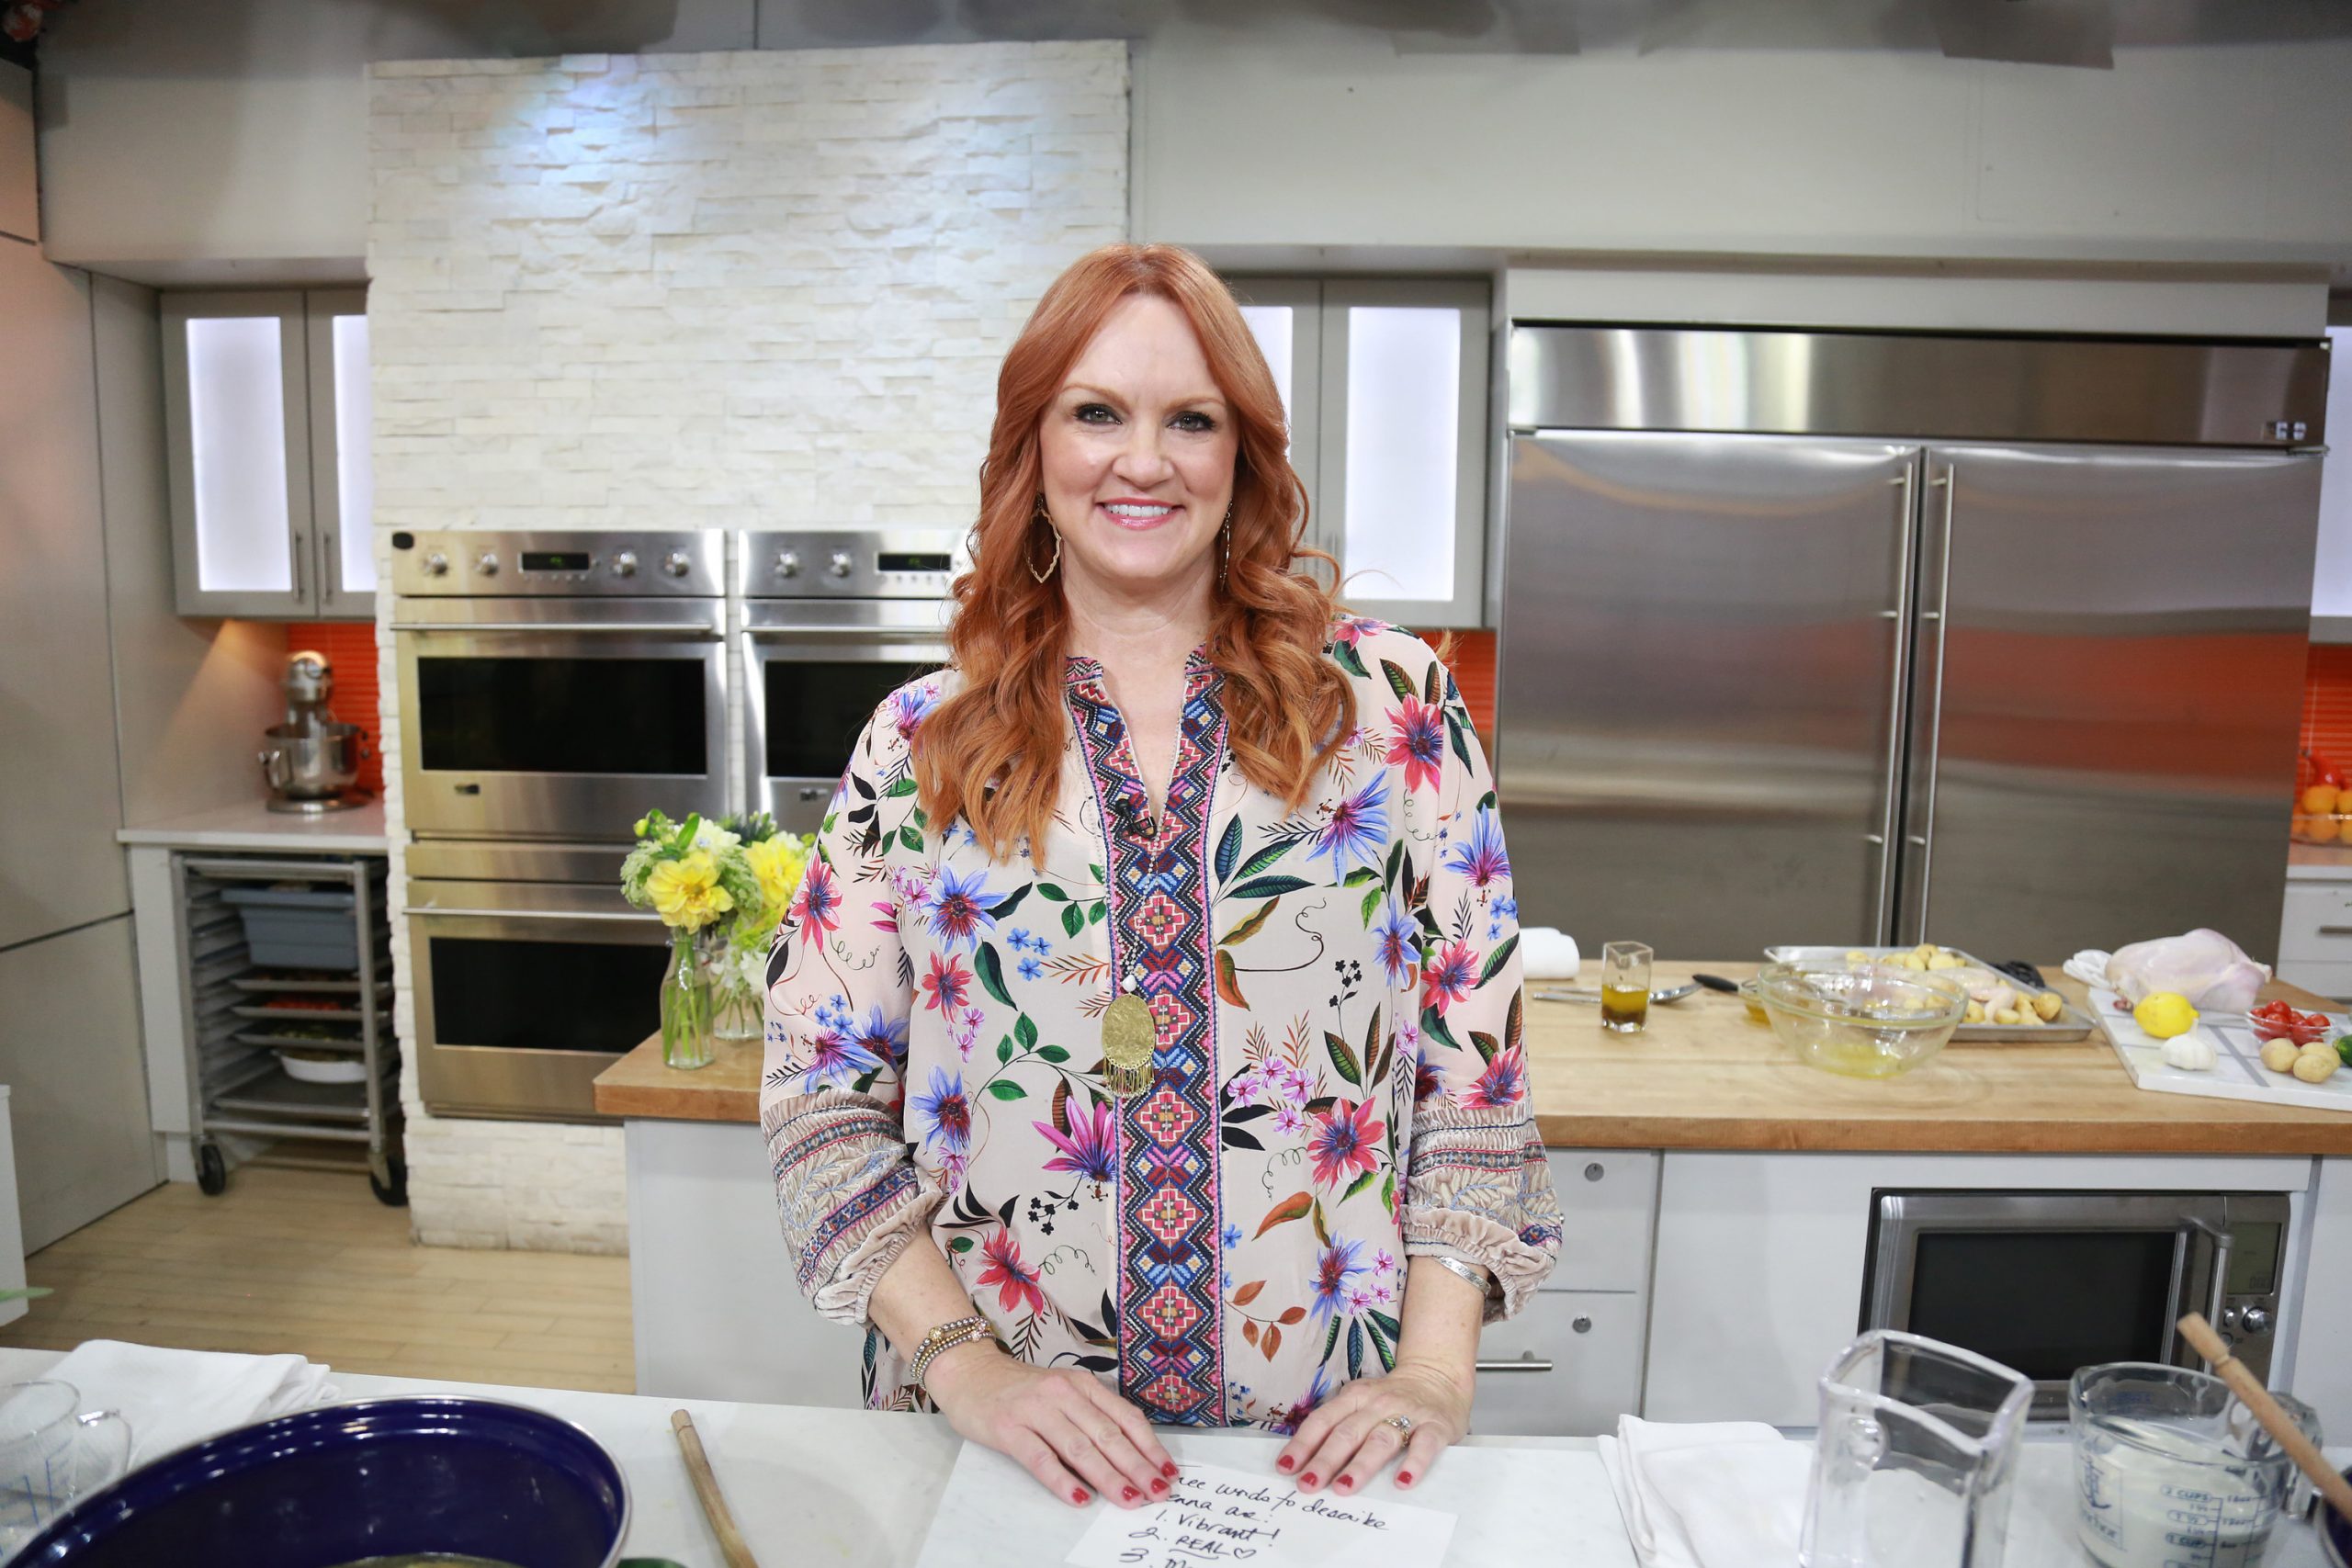 The Pioneer Woman Ree Drummond cooks on the Today show.